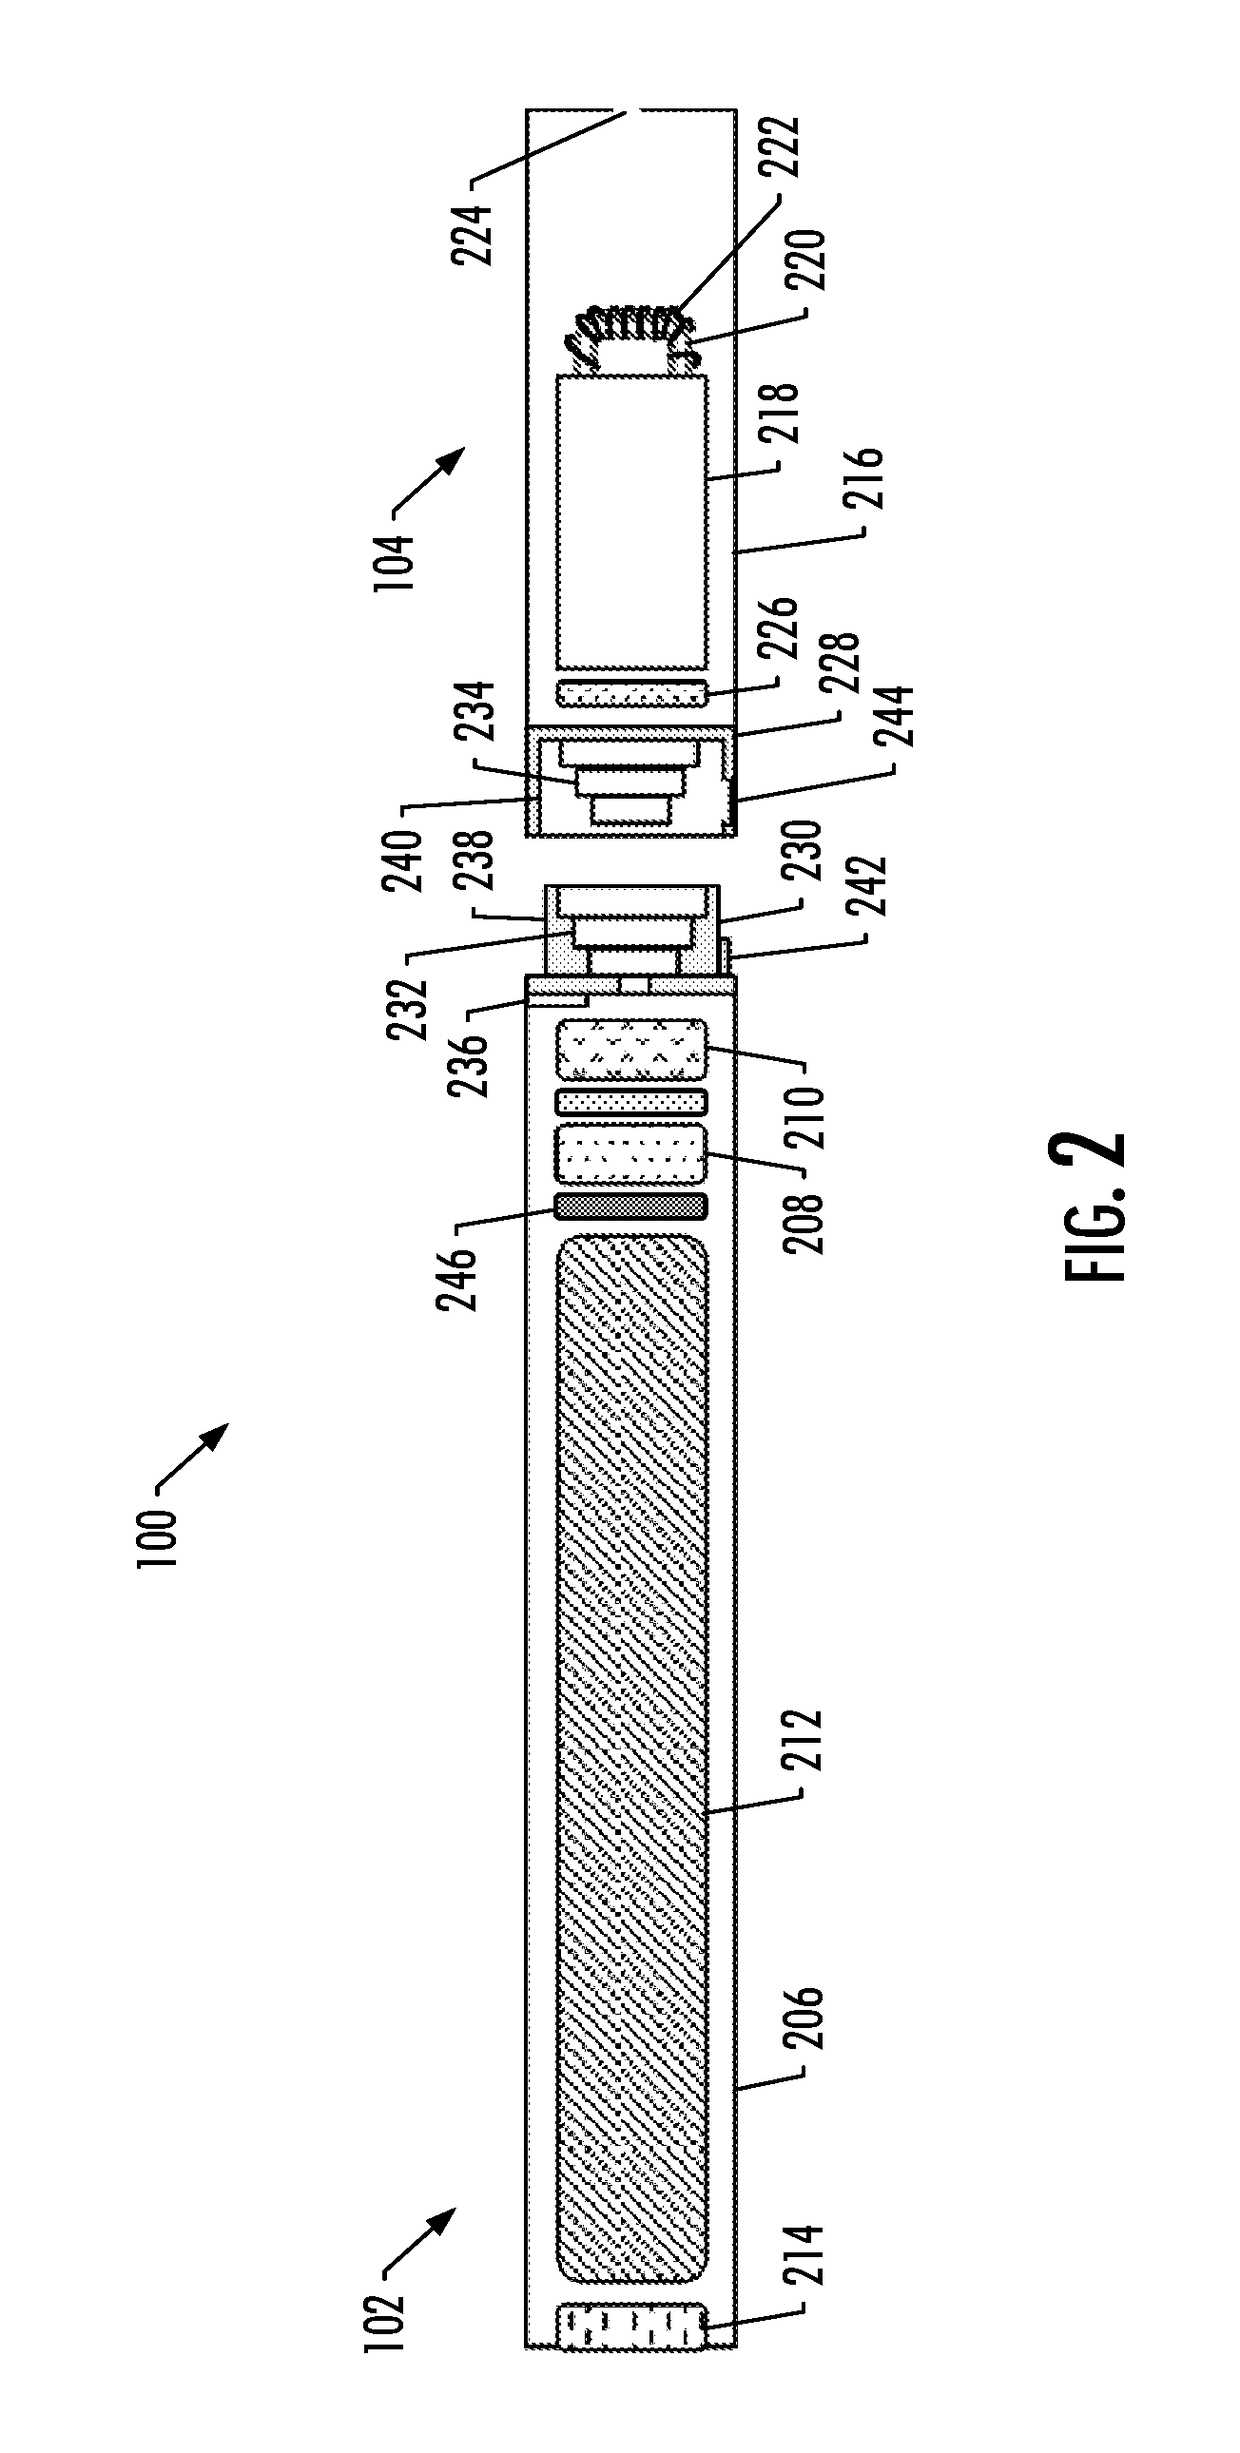 Induction charging for an aerosol delivery device